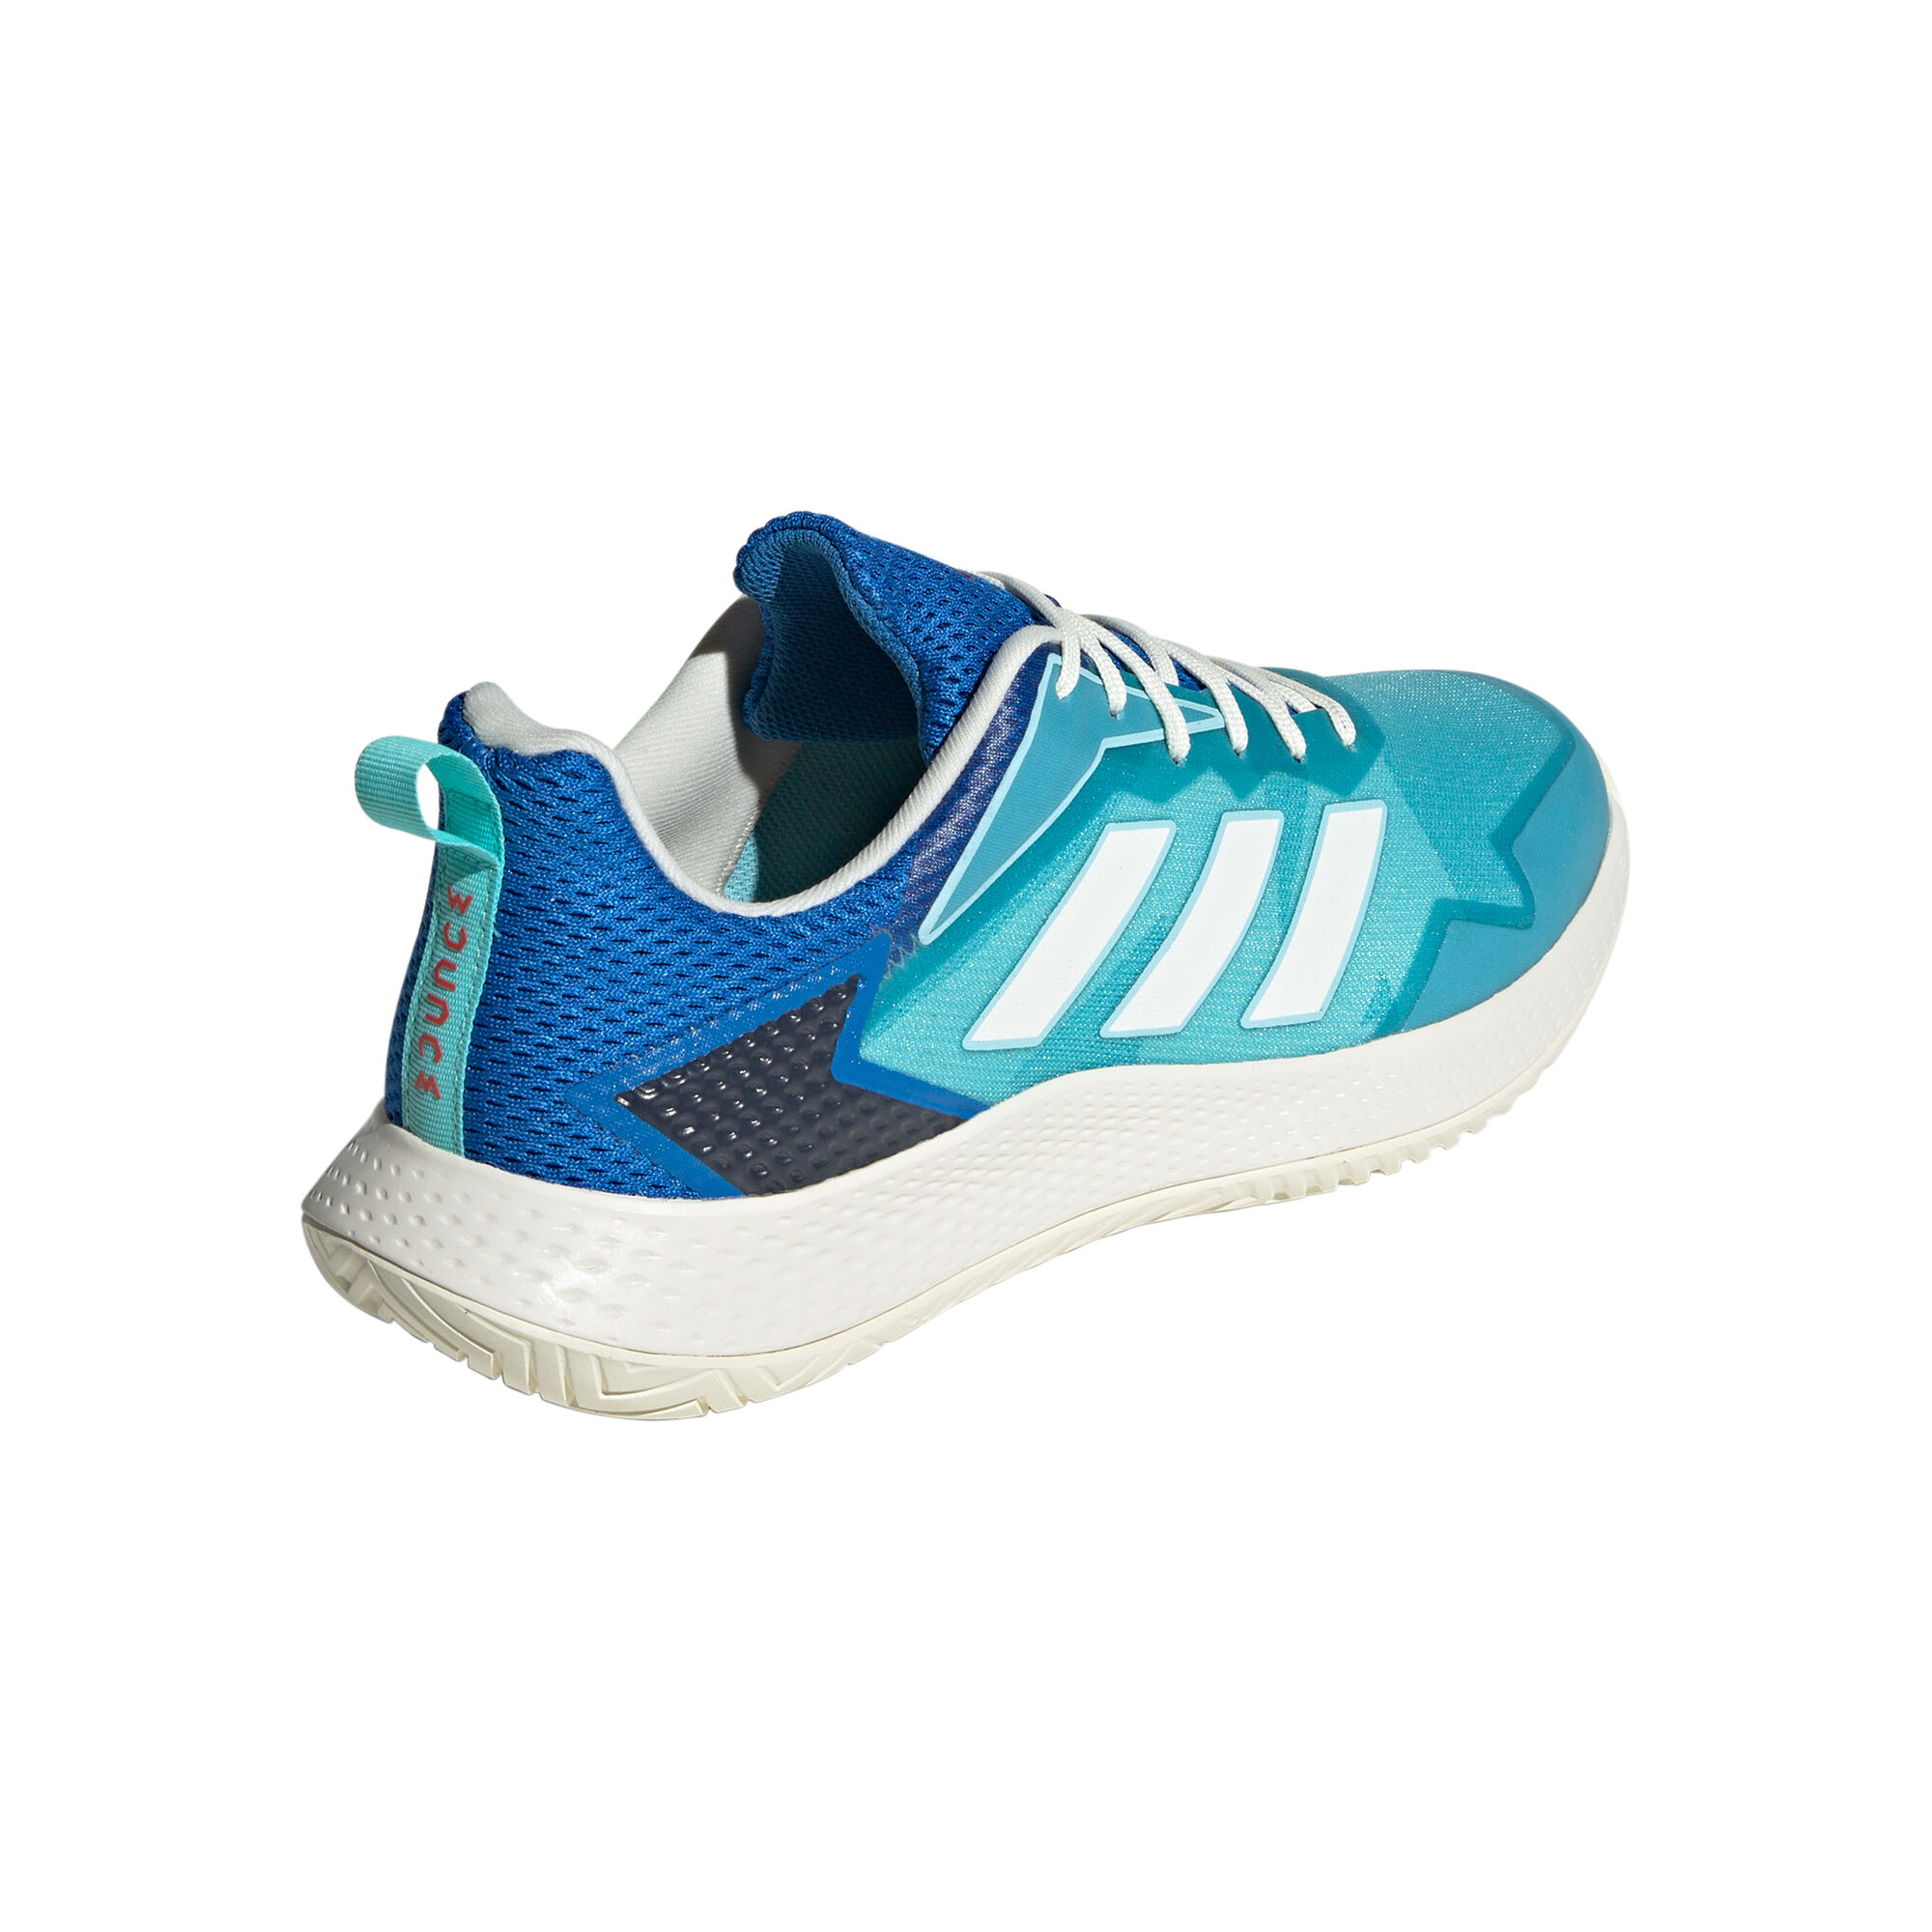 Chaussures adidas Defiant Speed Homme Blanc/Vert - Sports Raquettes